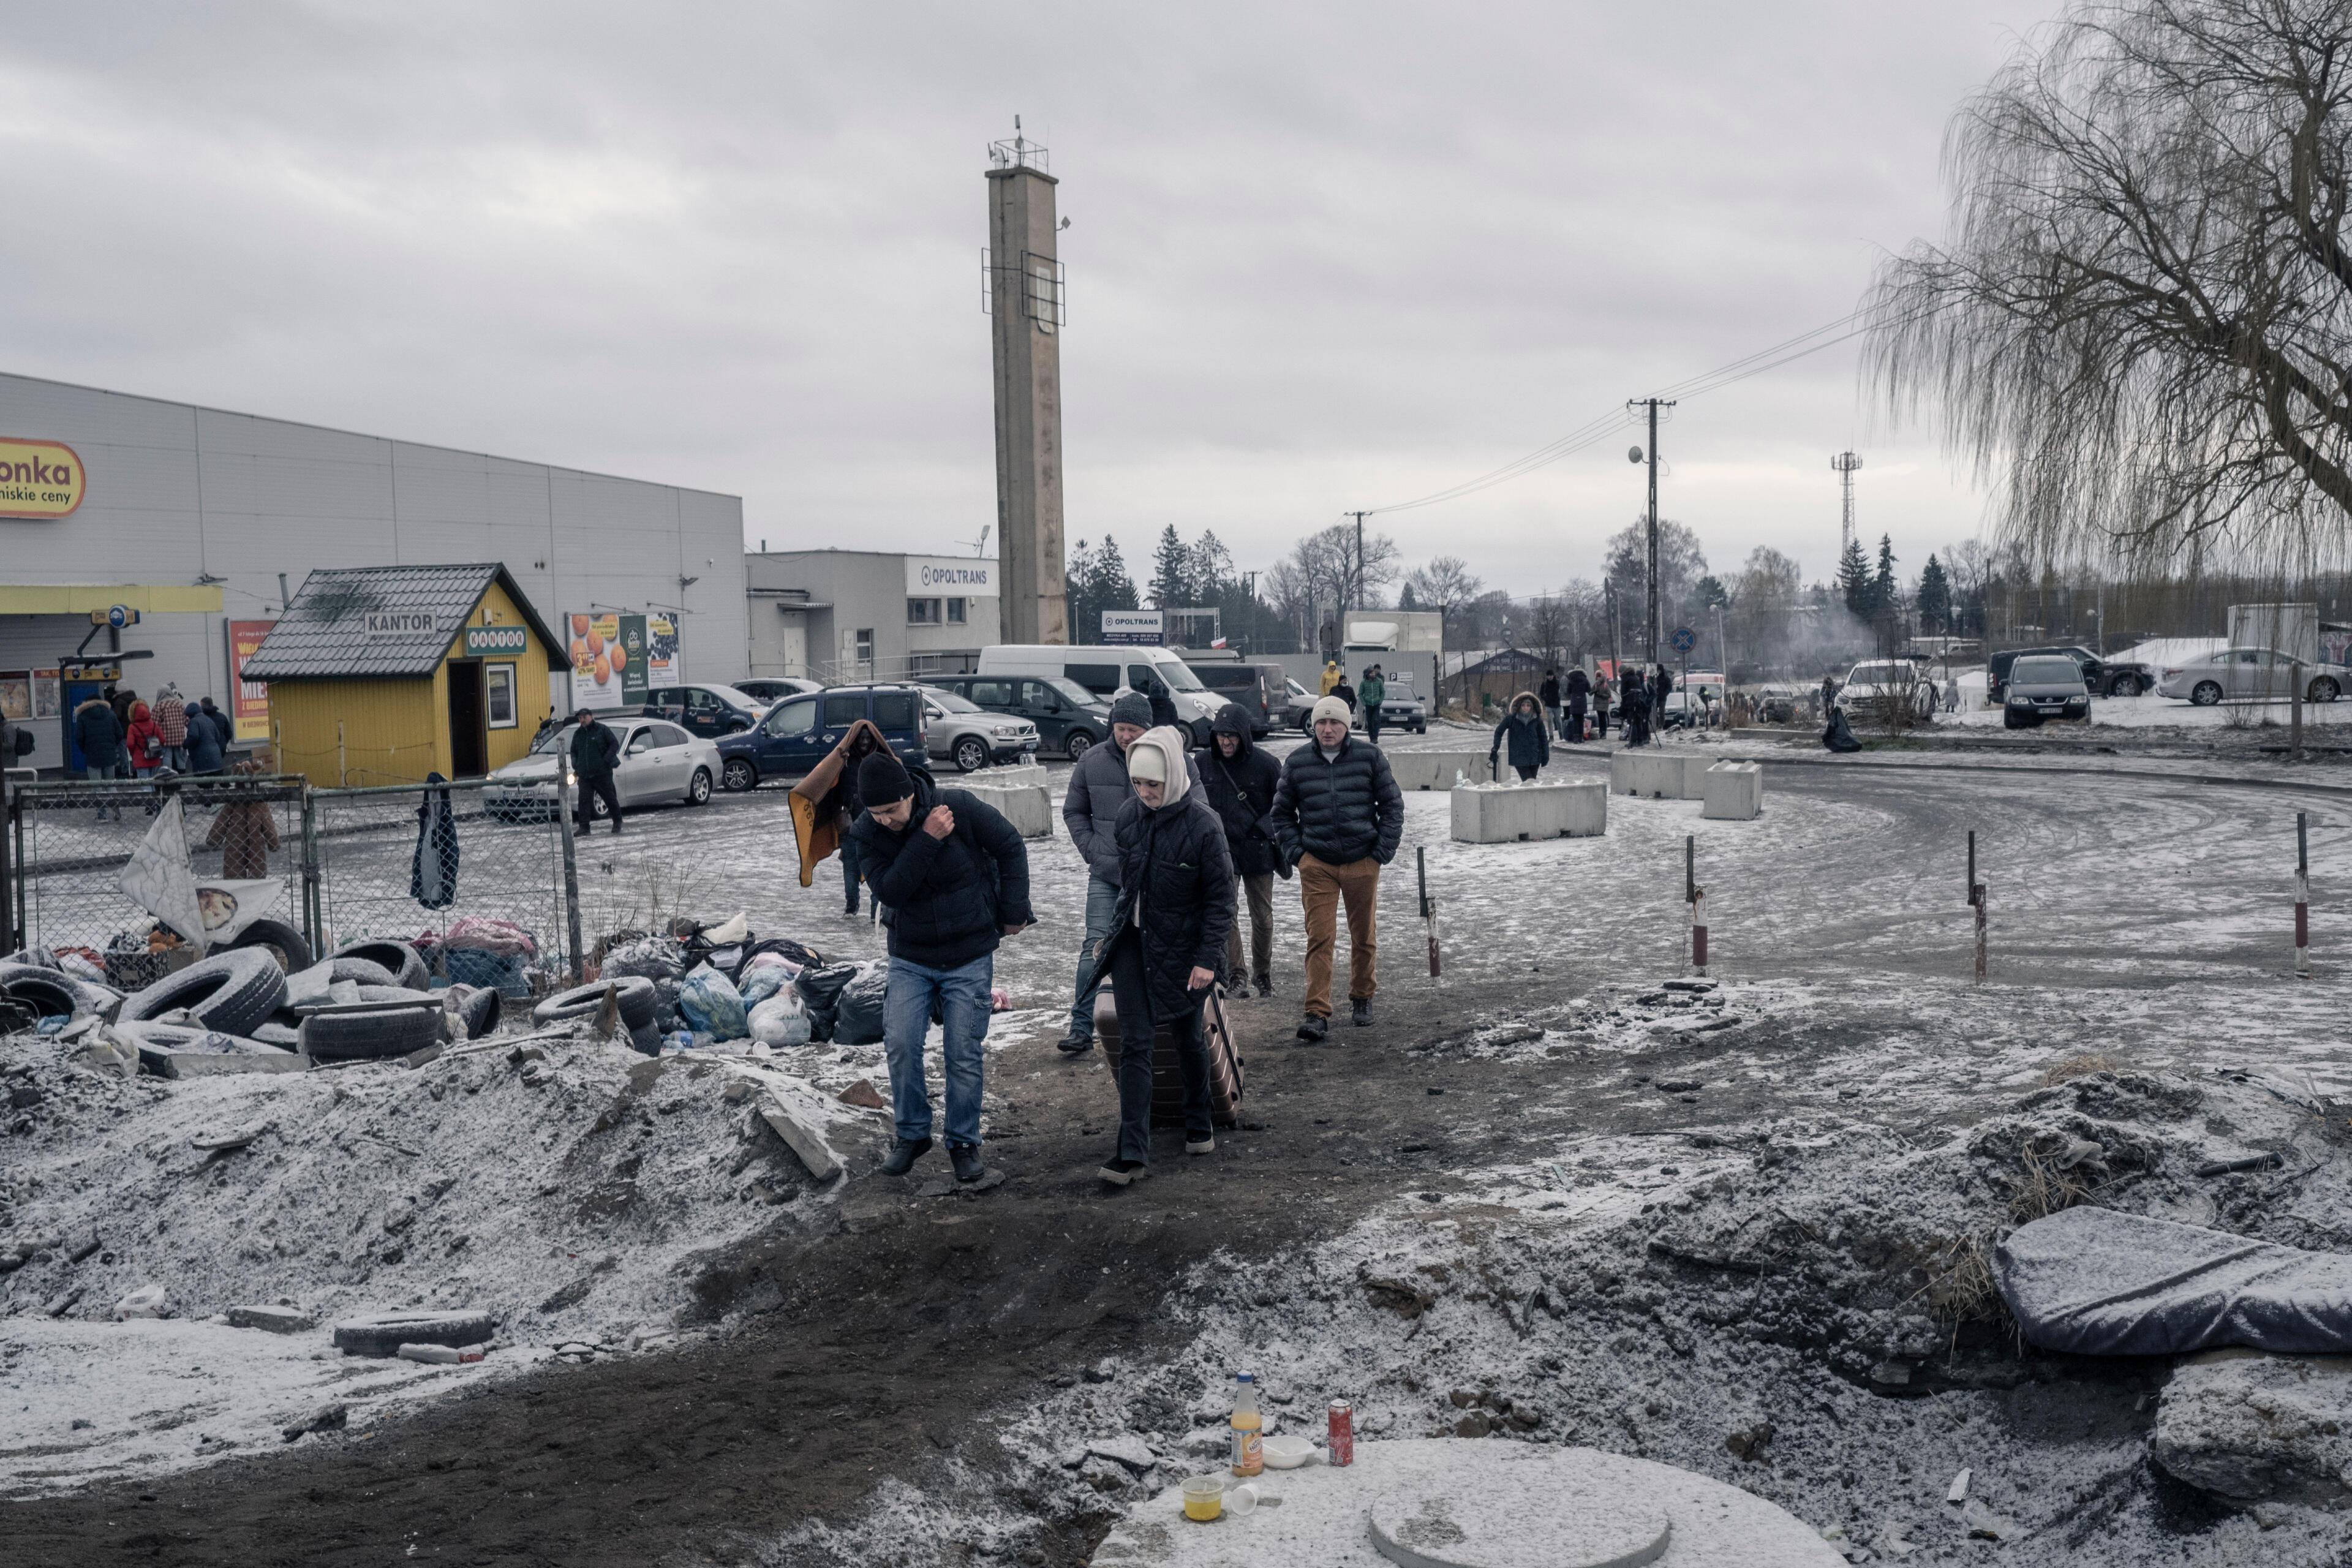 A small group of people who fled Ukraine carry small items of luggage as they walk through an industrial area after crossing the border into Poland.